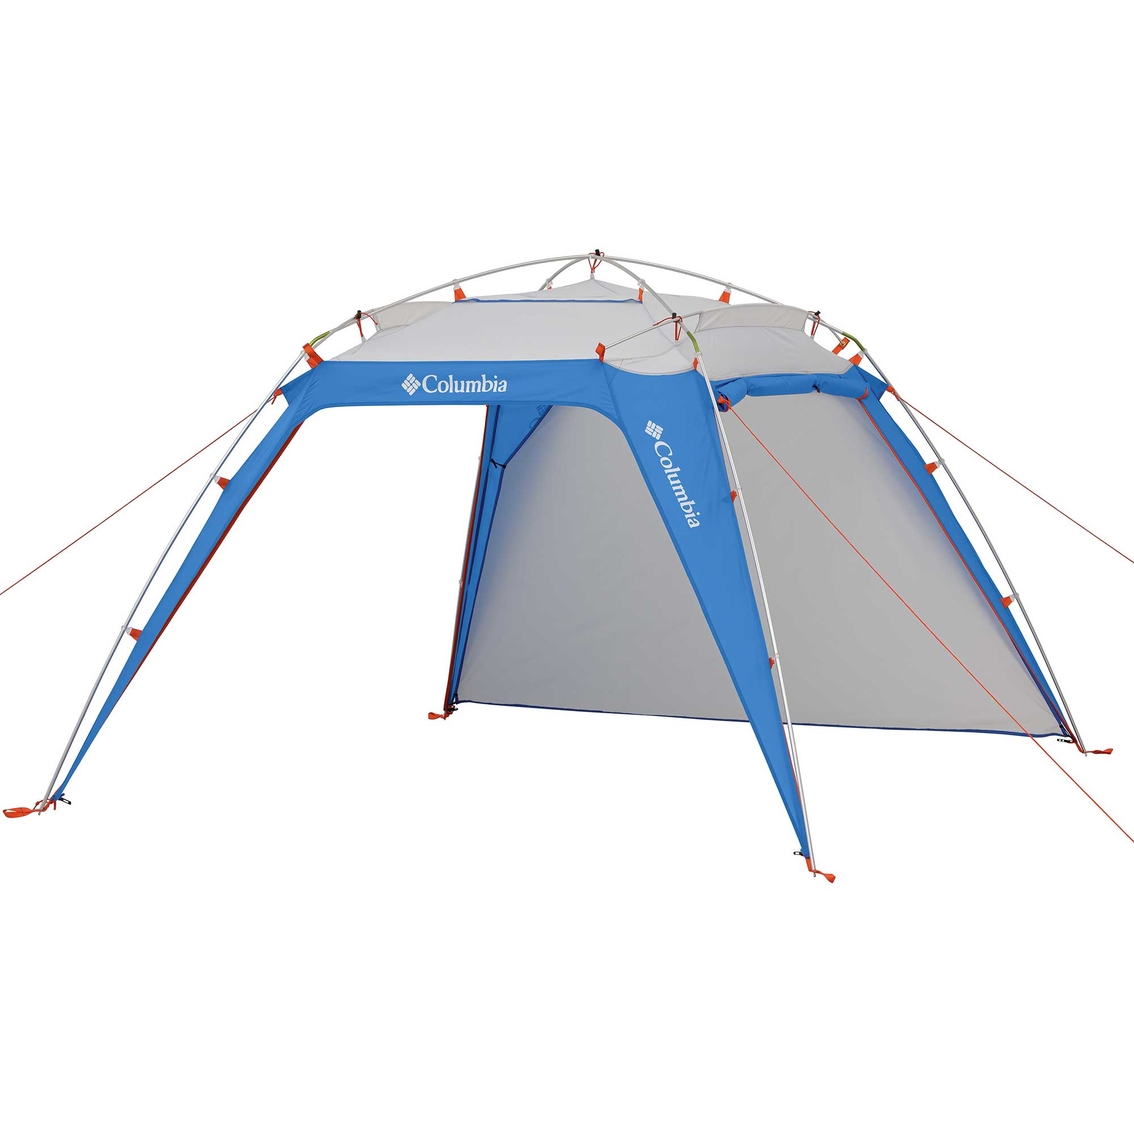 Columbia 8 x 8 ft. Sport Shade - Image 4 of 10